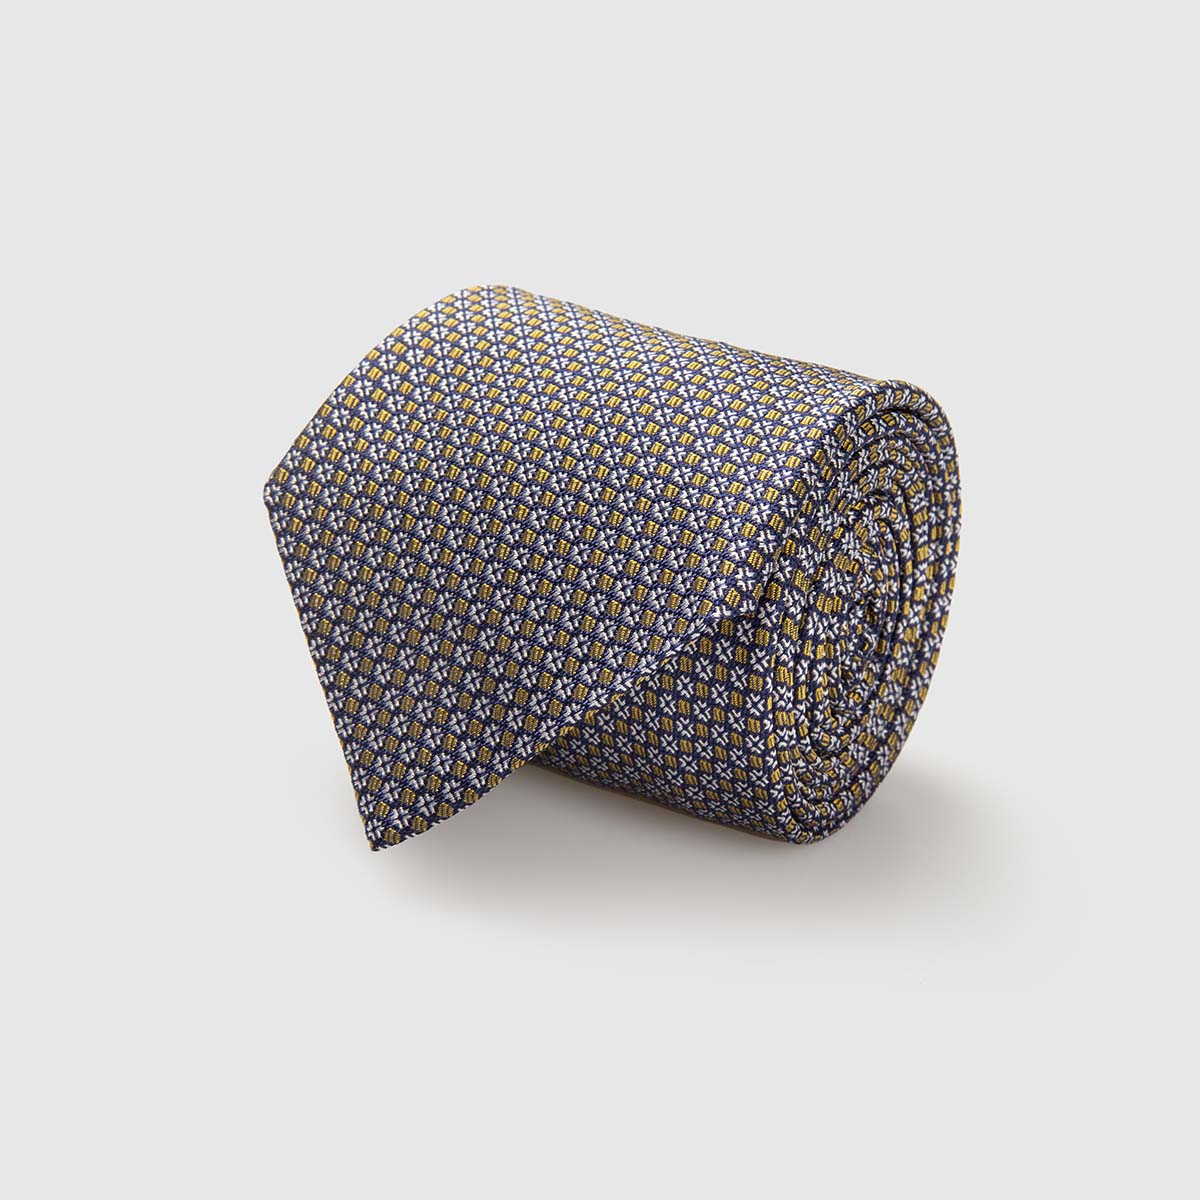 5-Fold Silk Jacquard Tie with geometrical pattern in gold and white Fumagalli 1891 on sale 2022